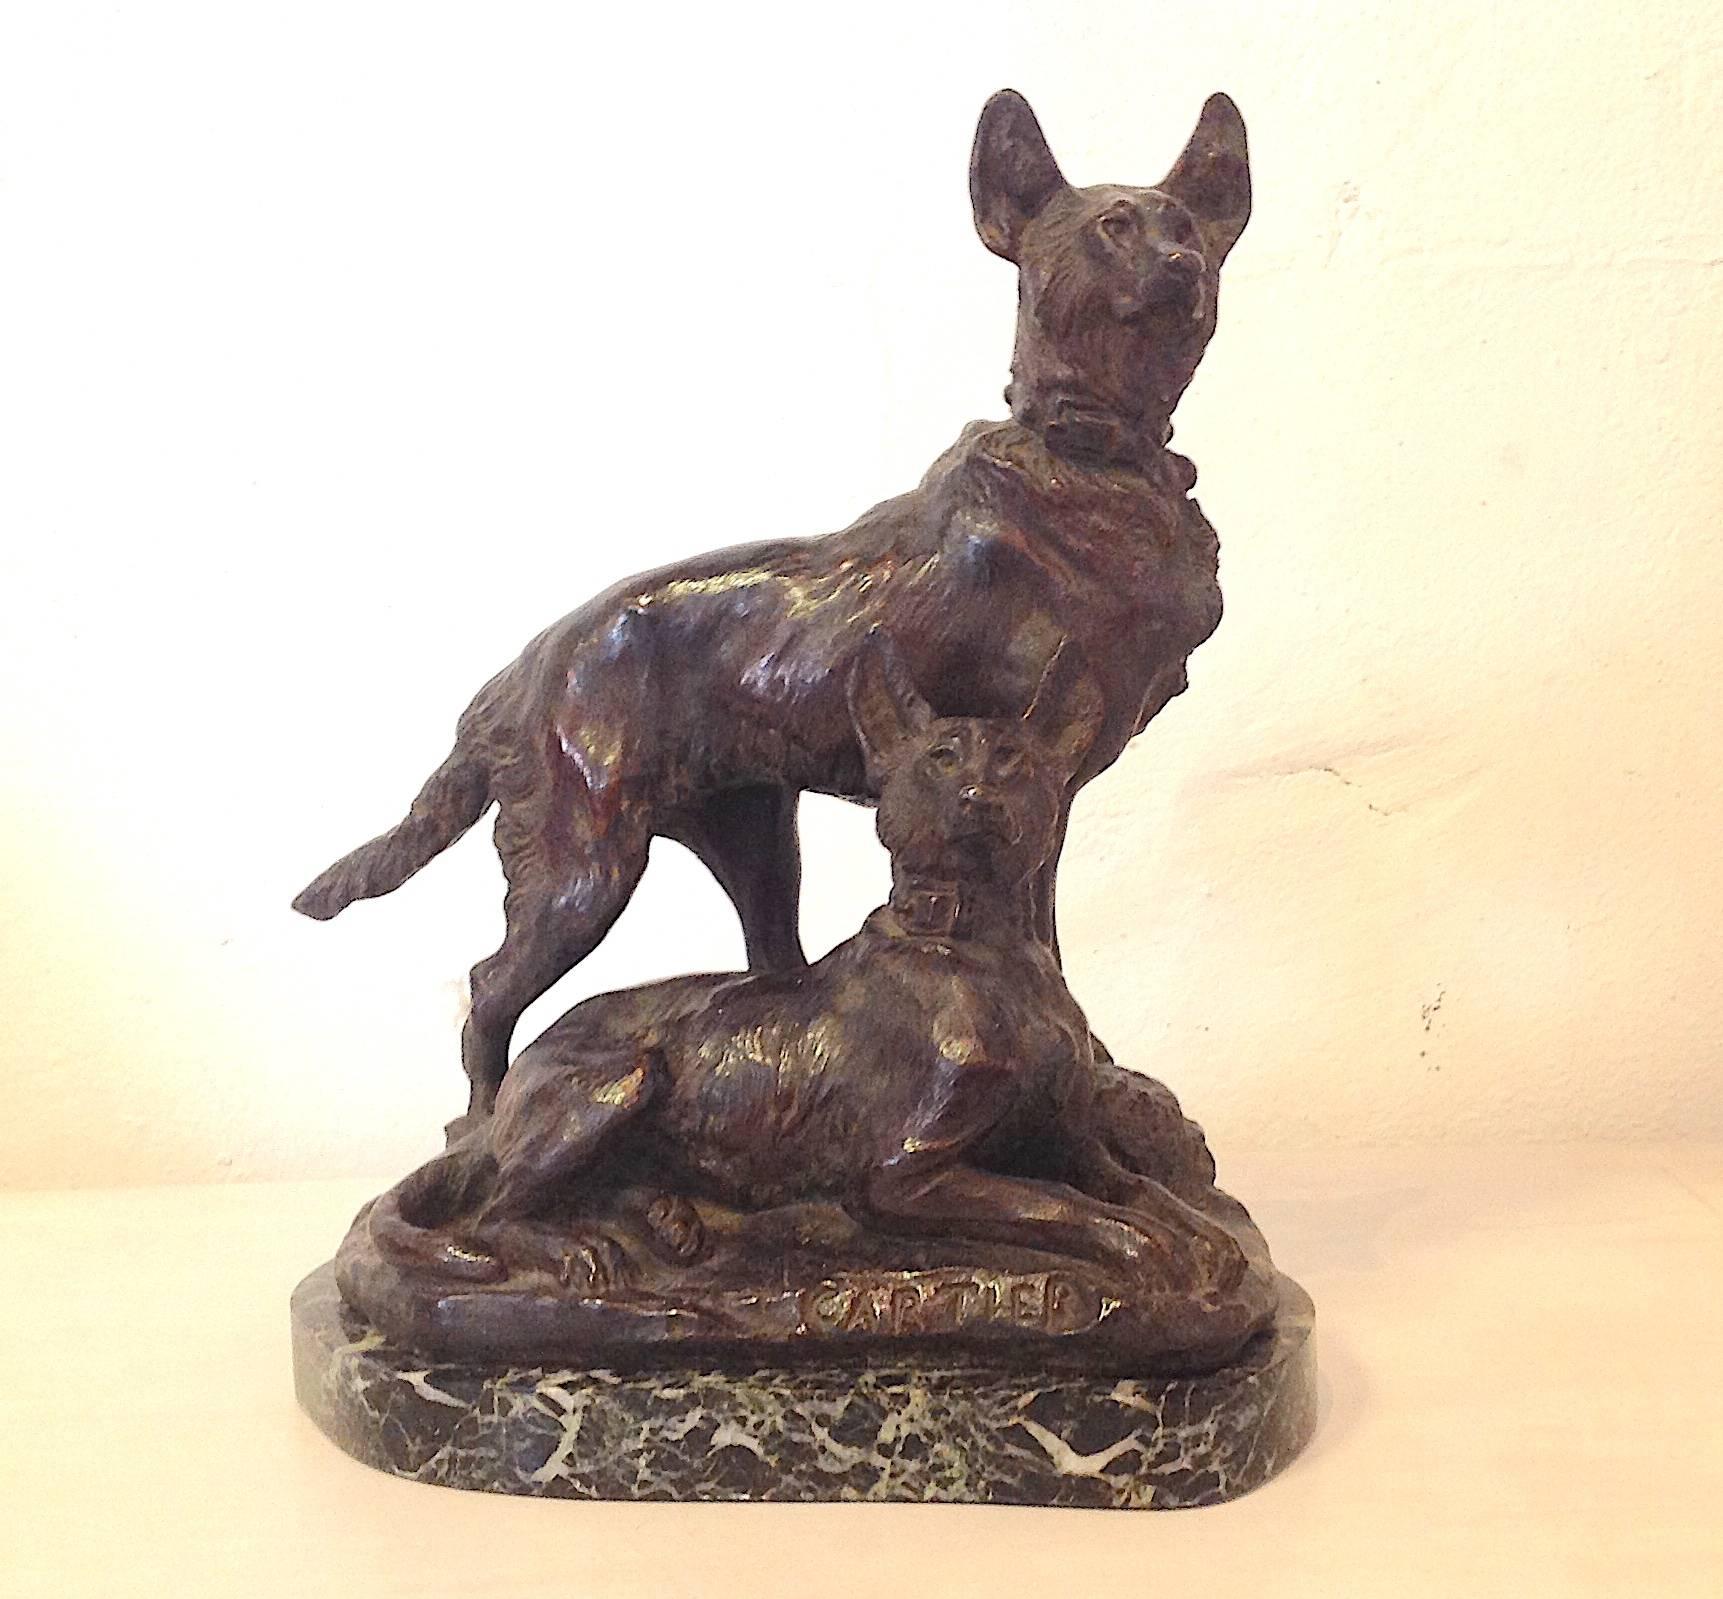 Original antique bronze Wolfhound sculpture signed by Thomas Francois Cartier with marble base. Measure 12.25 inches high and 10.5 inches wide. Excellent condition.